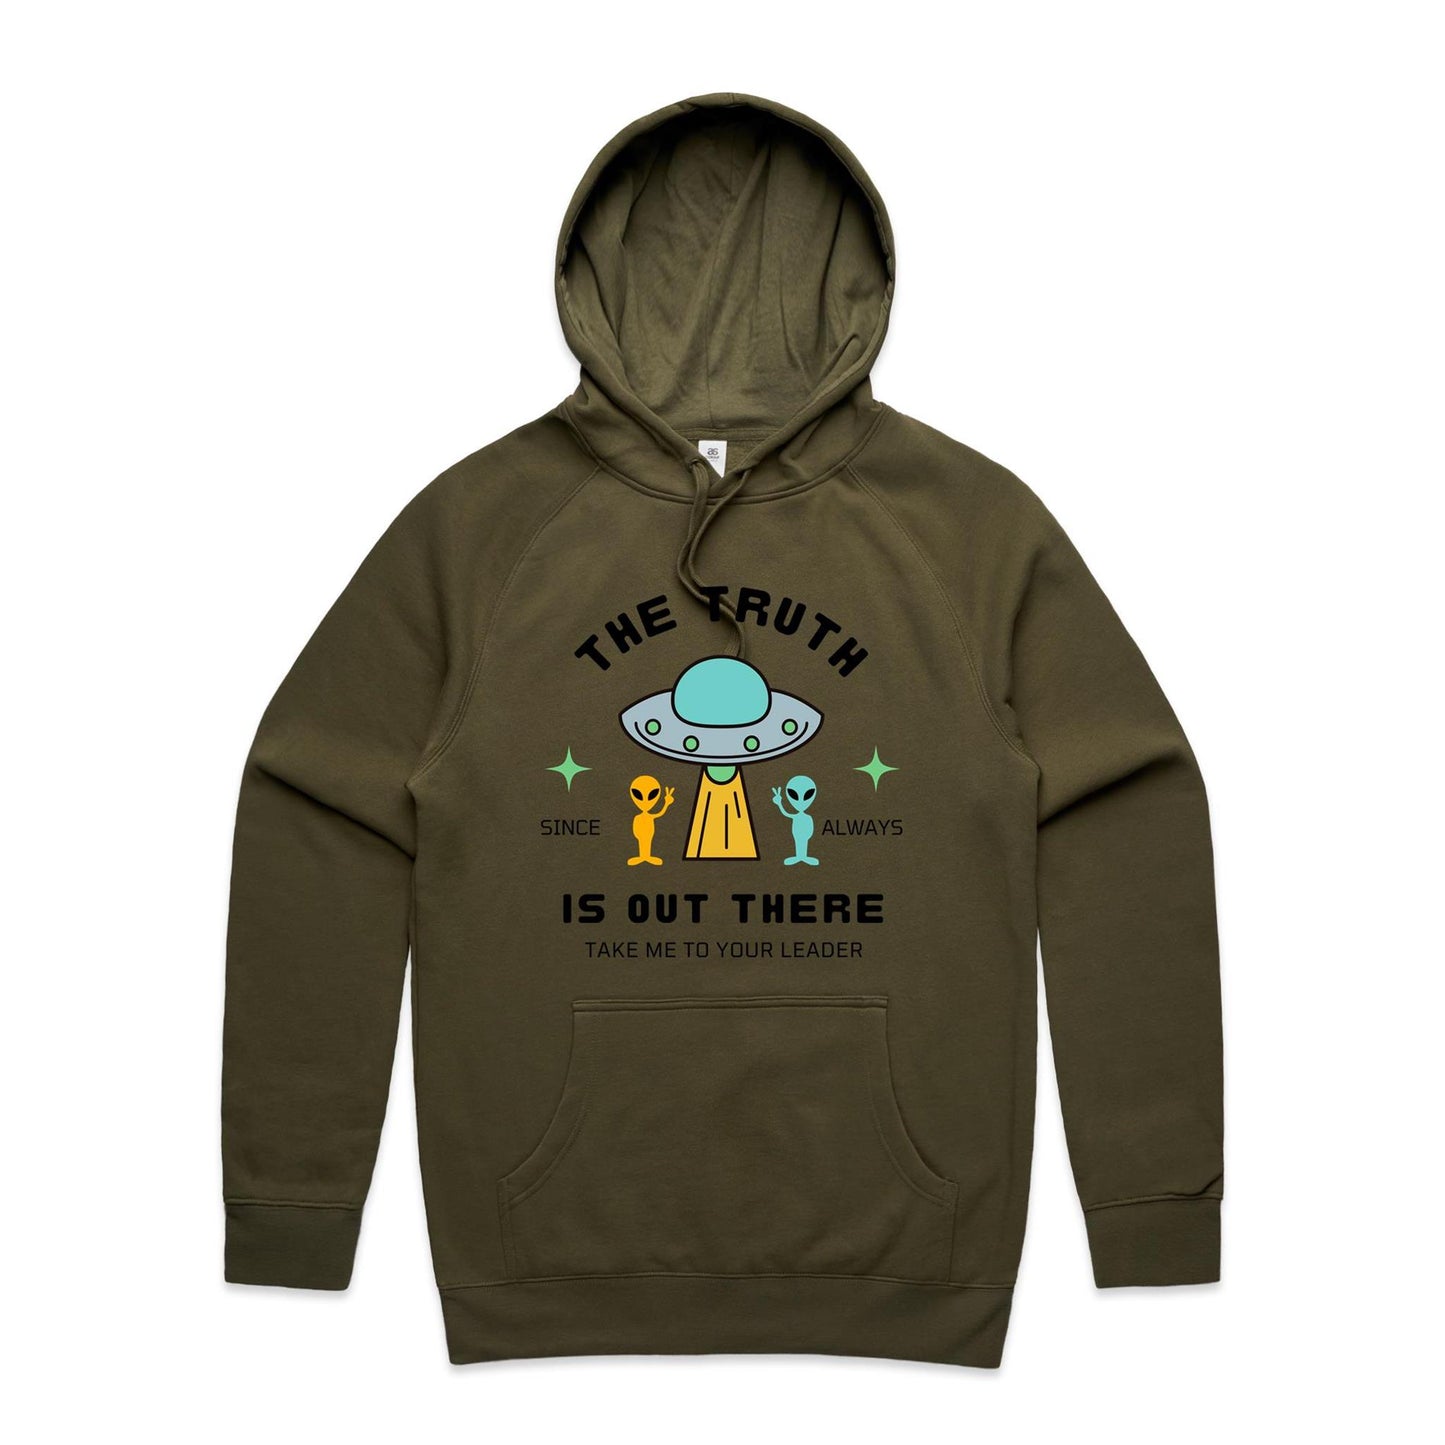 The Truth Is Out There - Supply Hood Army Mens Supply Hoodie Sci Fi